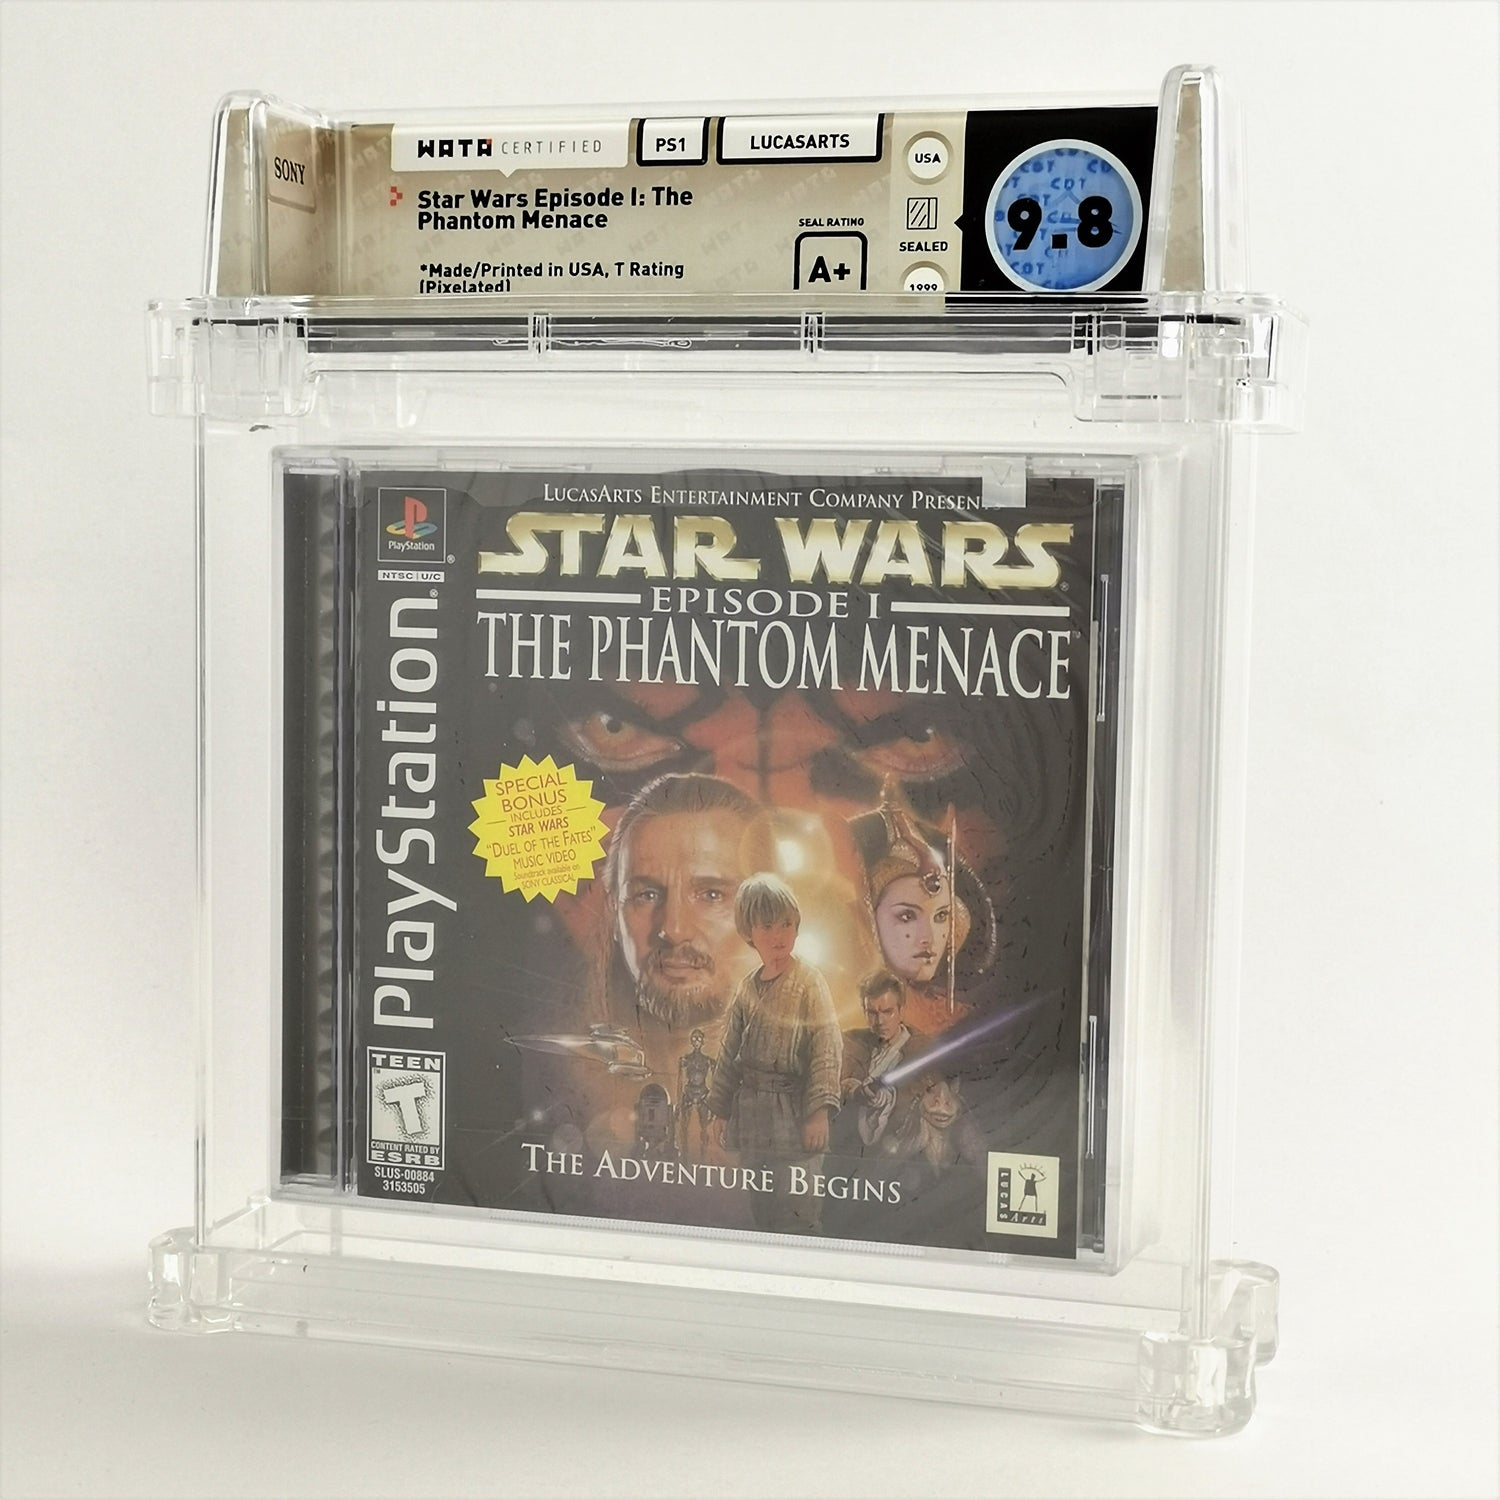 Sony Playstation 1 Game: Star Wars Episode I - NEW SEALED | WATA Games 9.8 A+